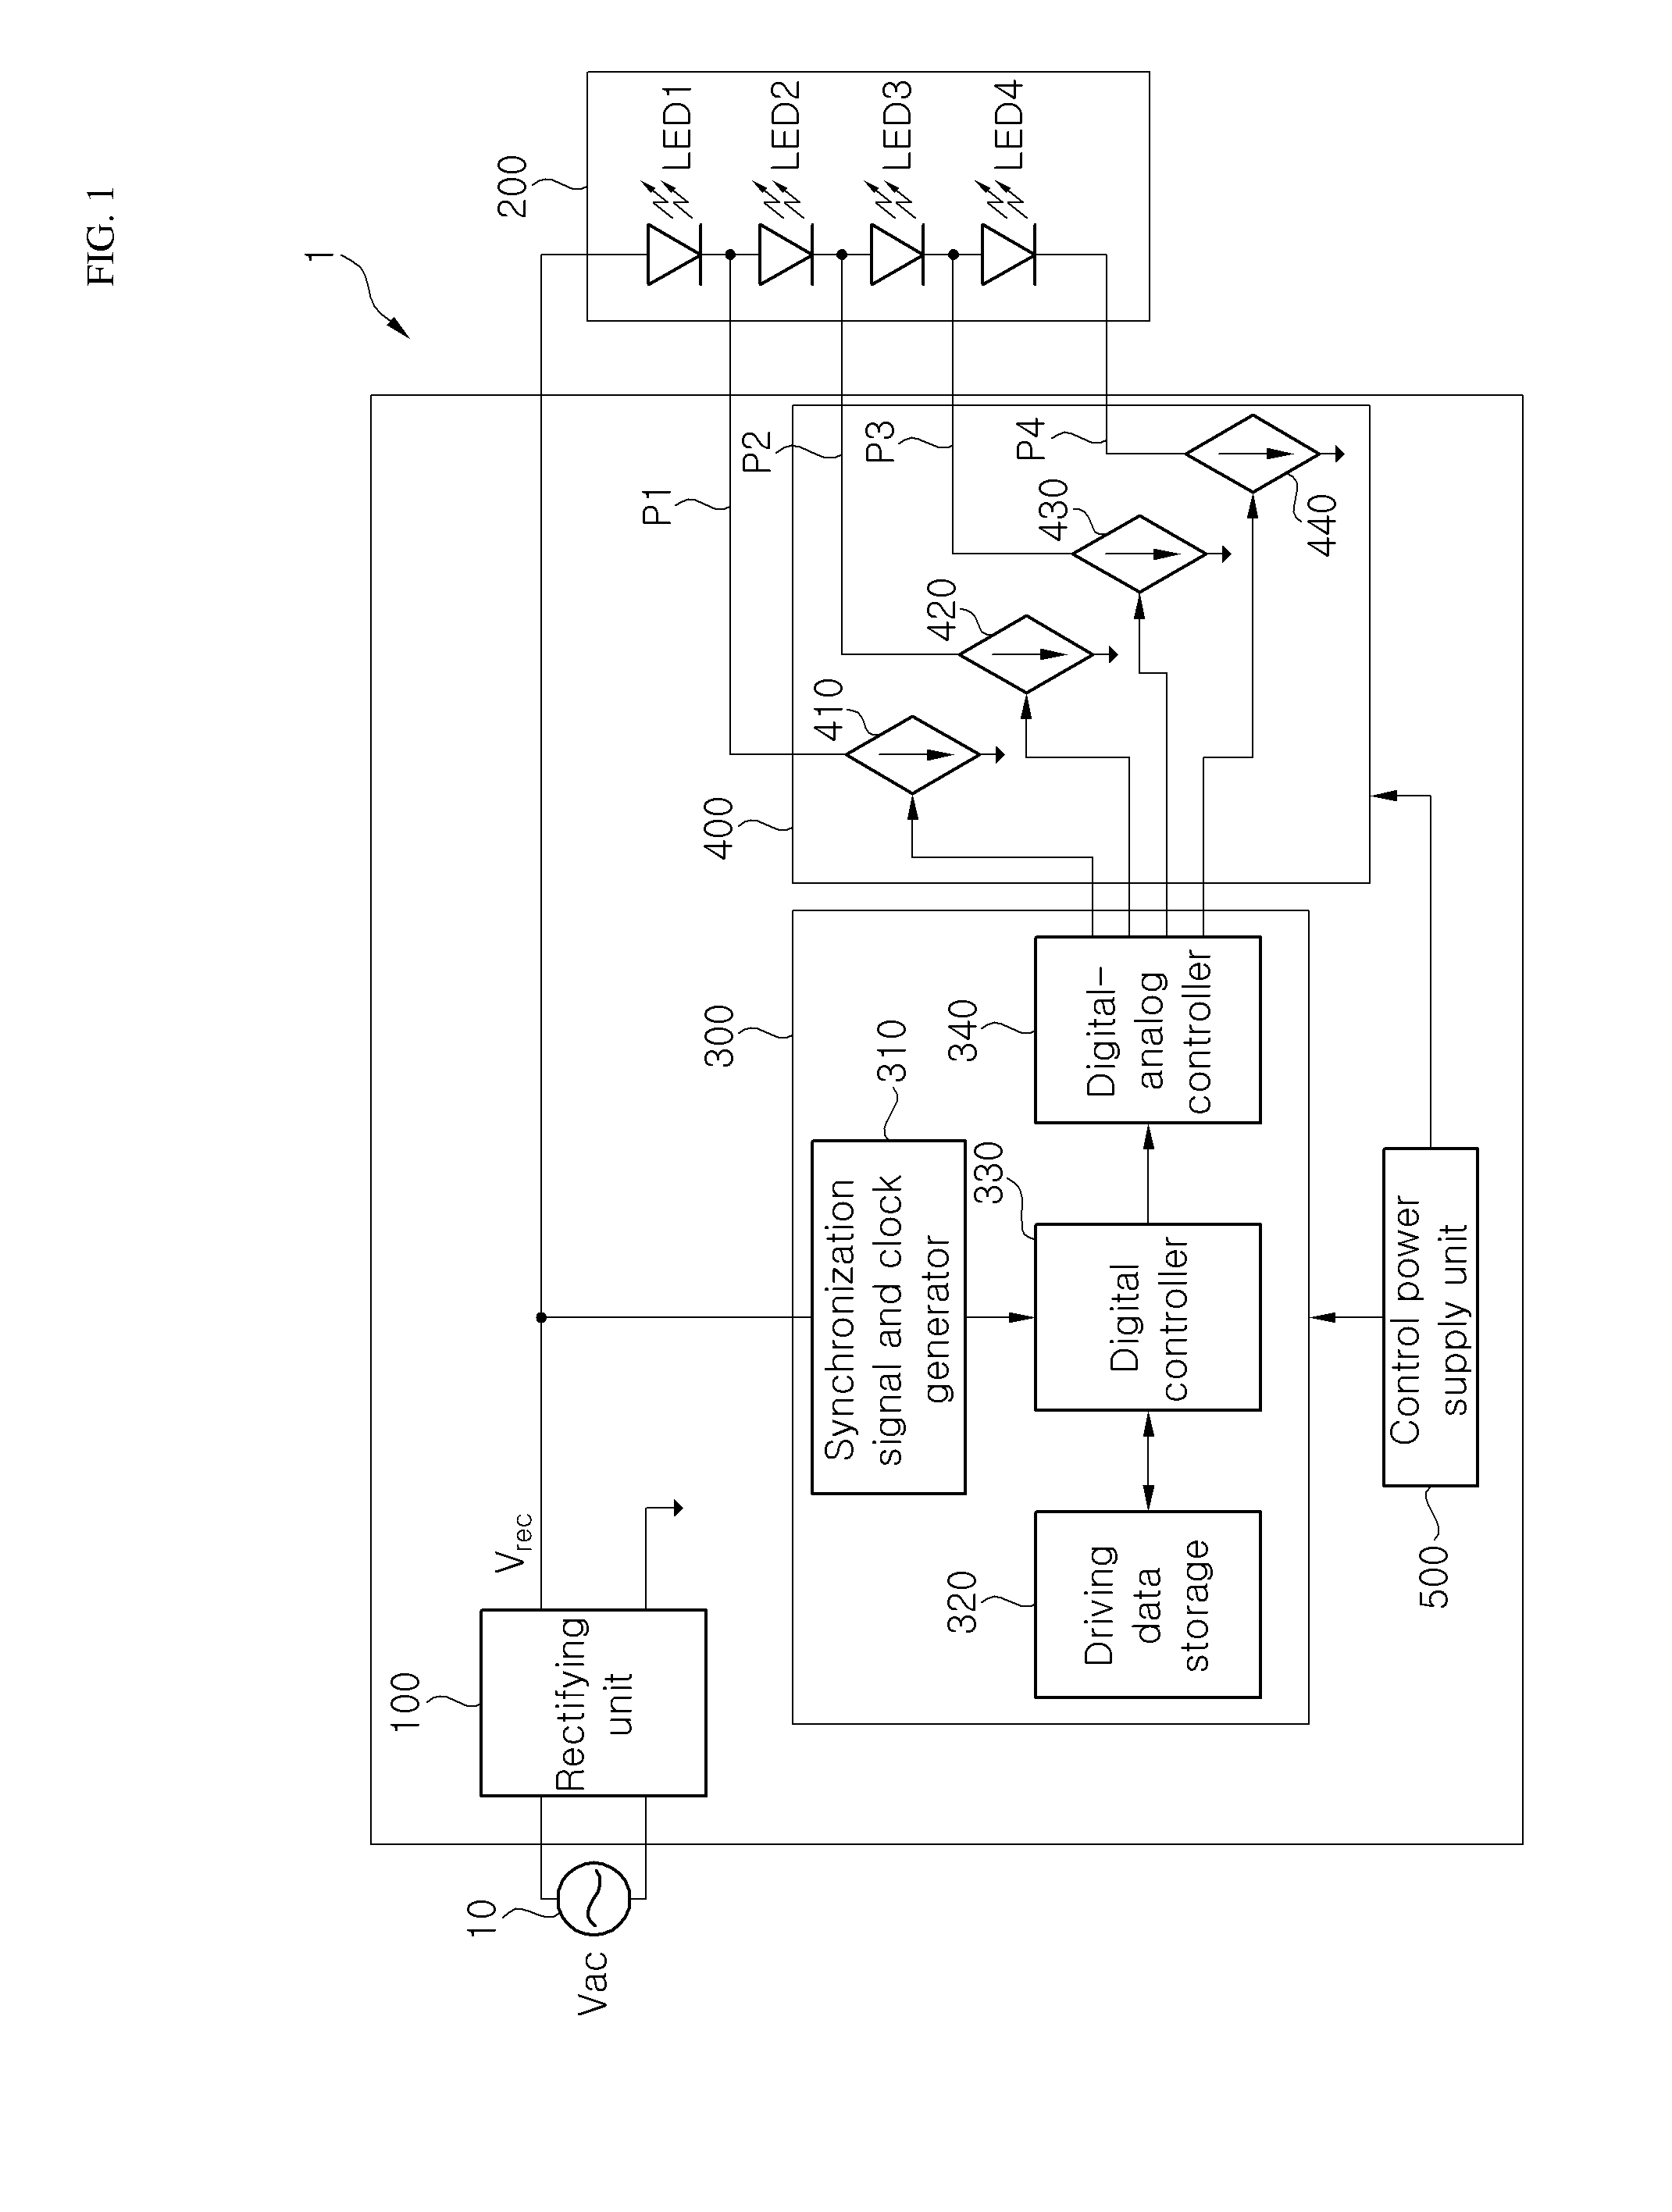 Light emitting diode driving device